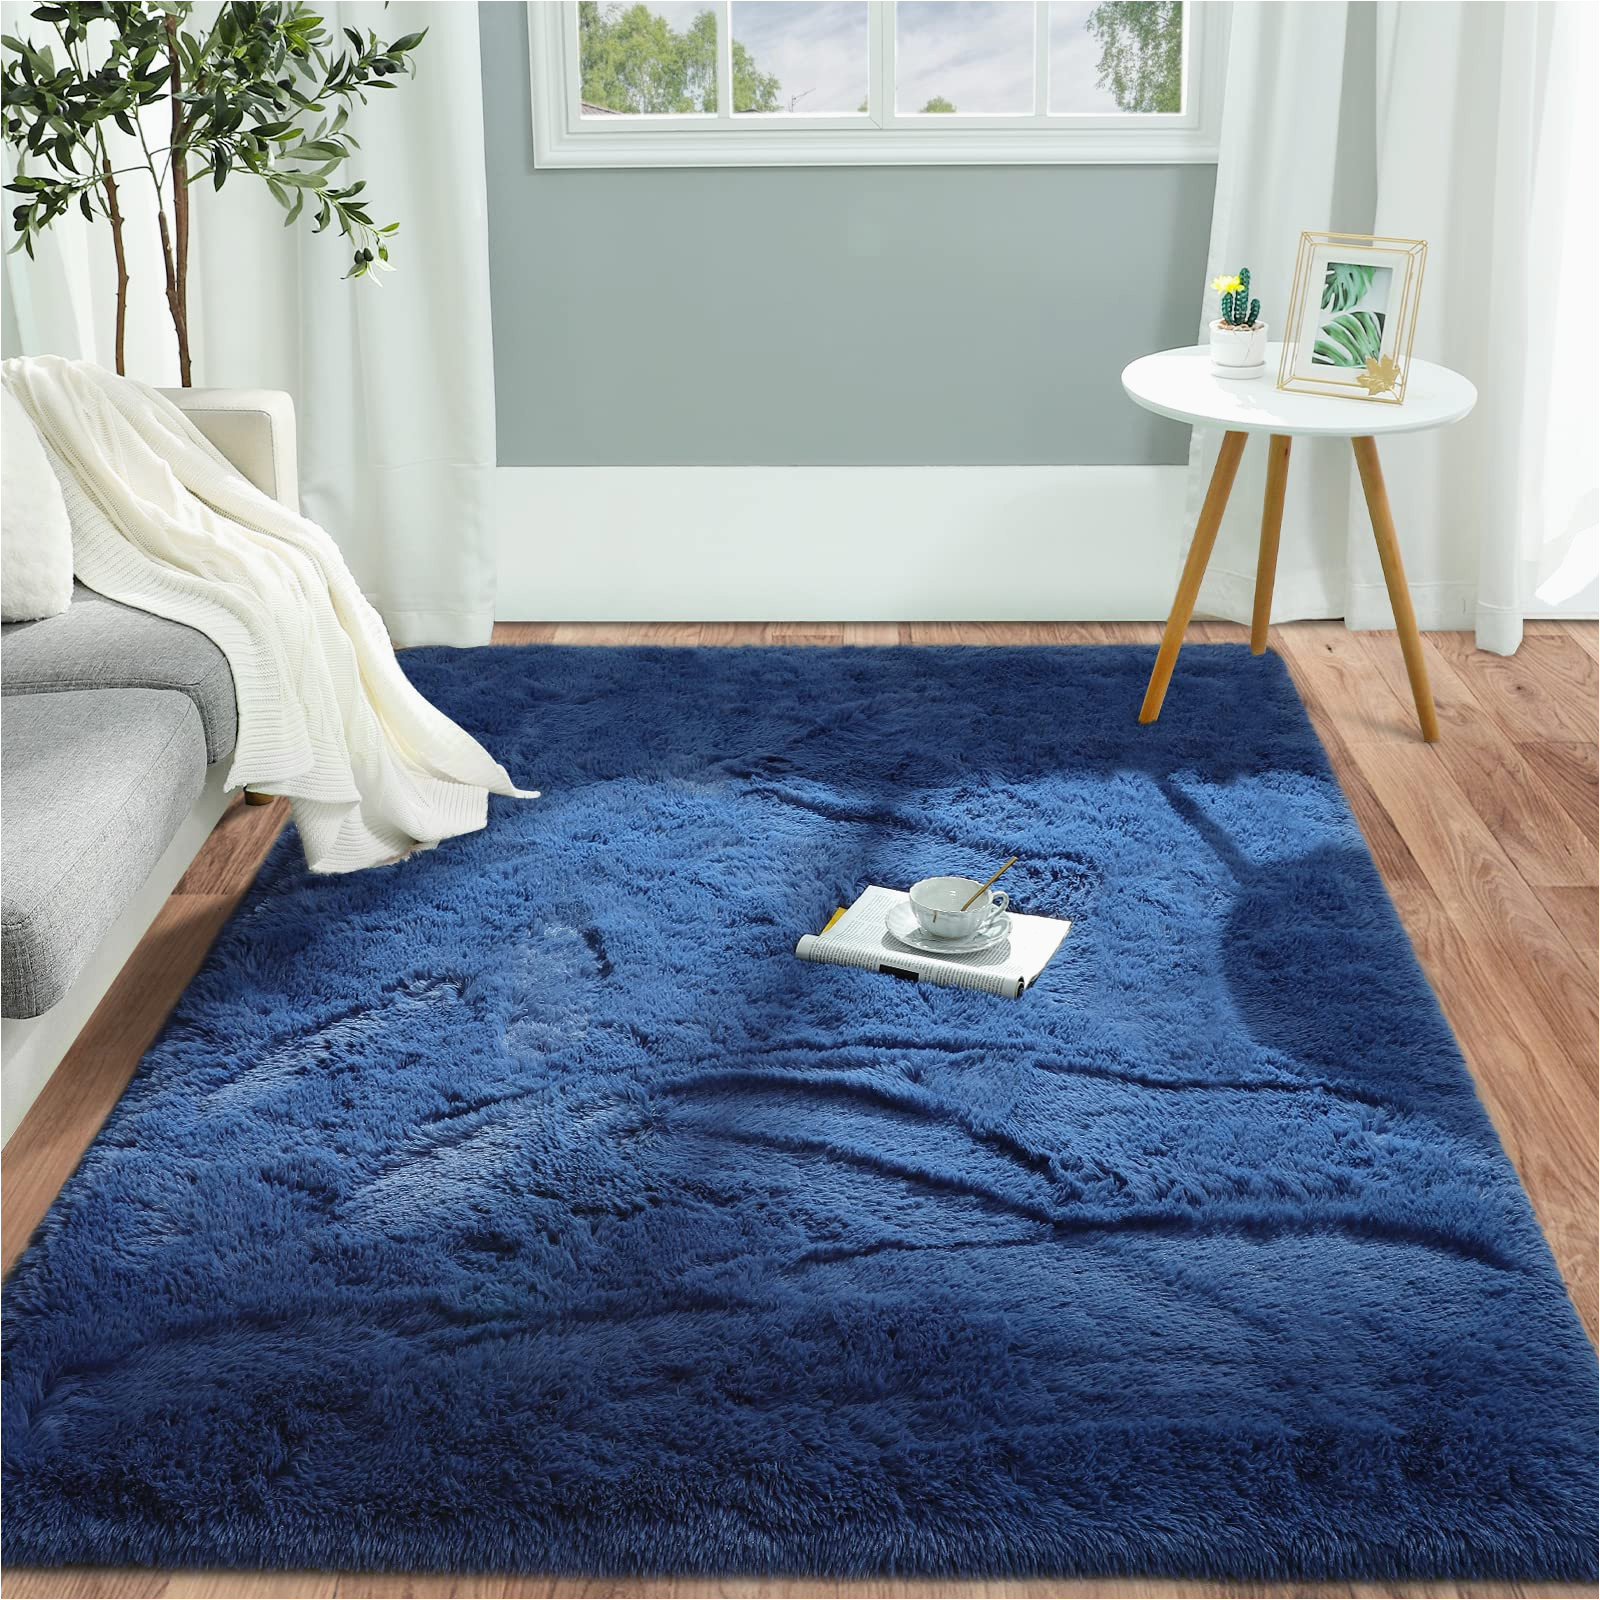 4 X 6 area Rugs Blue Amazon.com: Pettop Fluffy Shaggy area Rugs for Girls Bedroom,4×6 …